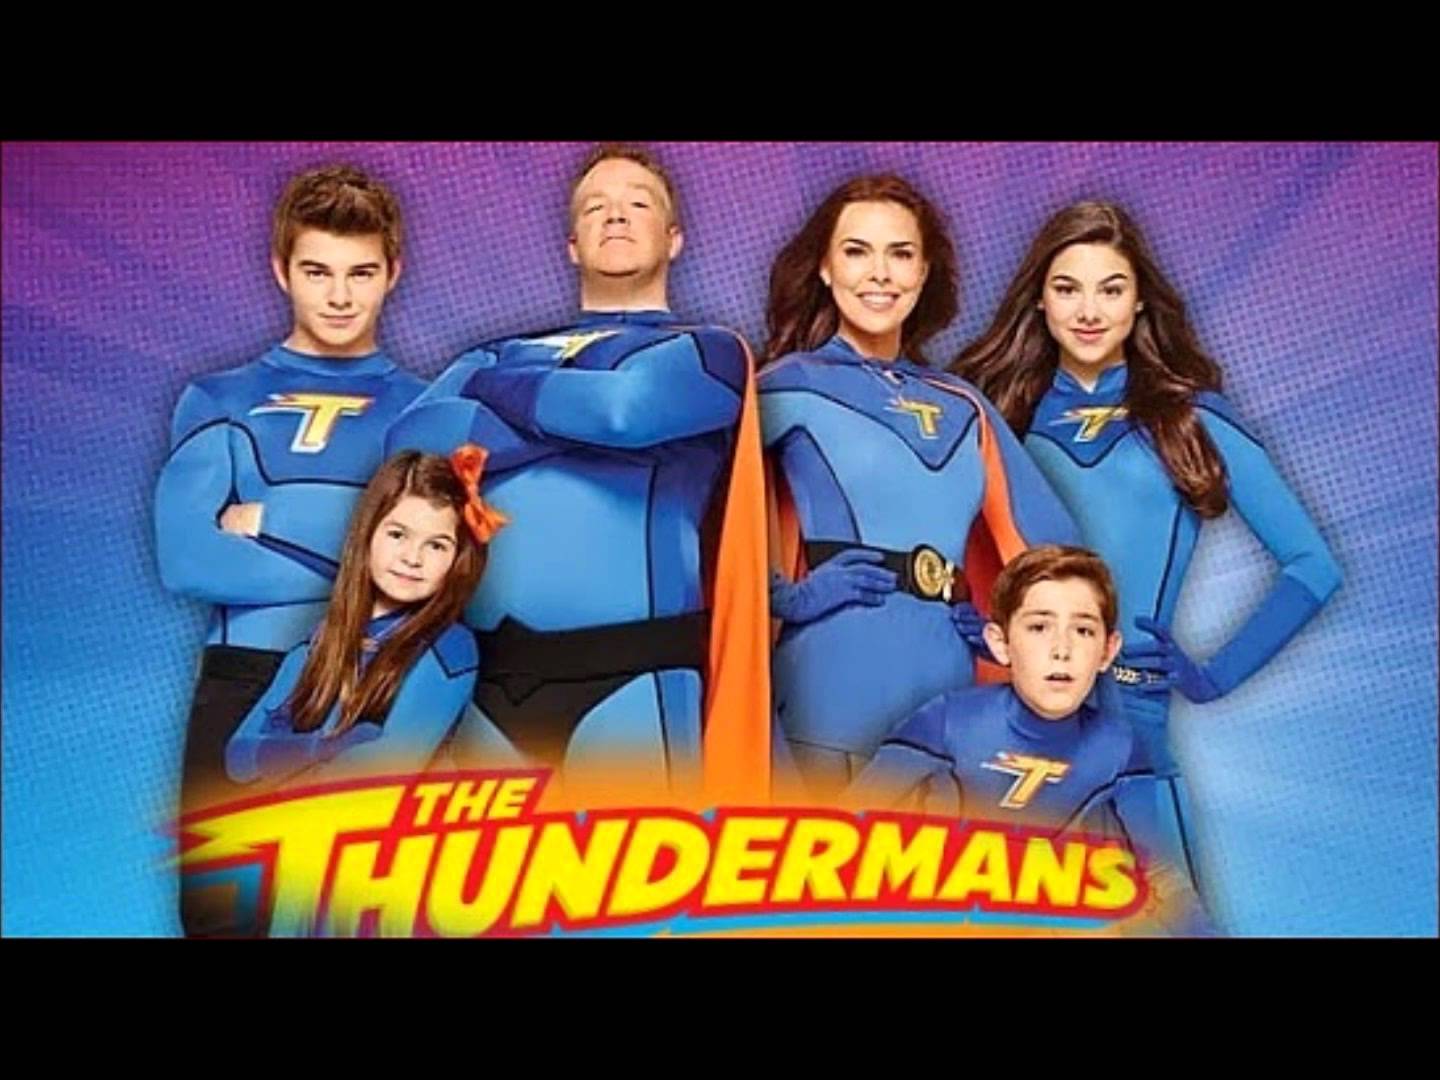 The Thundermans Wallpapers - Top Free The Thundermans Backgrounds ...